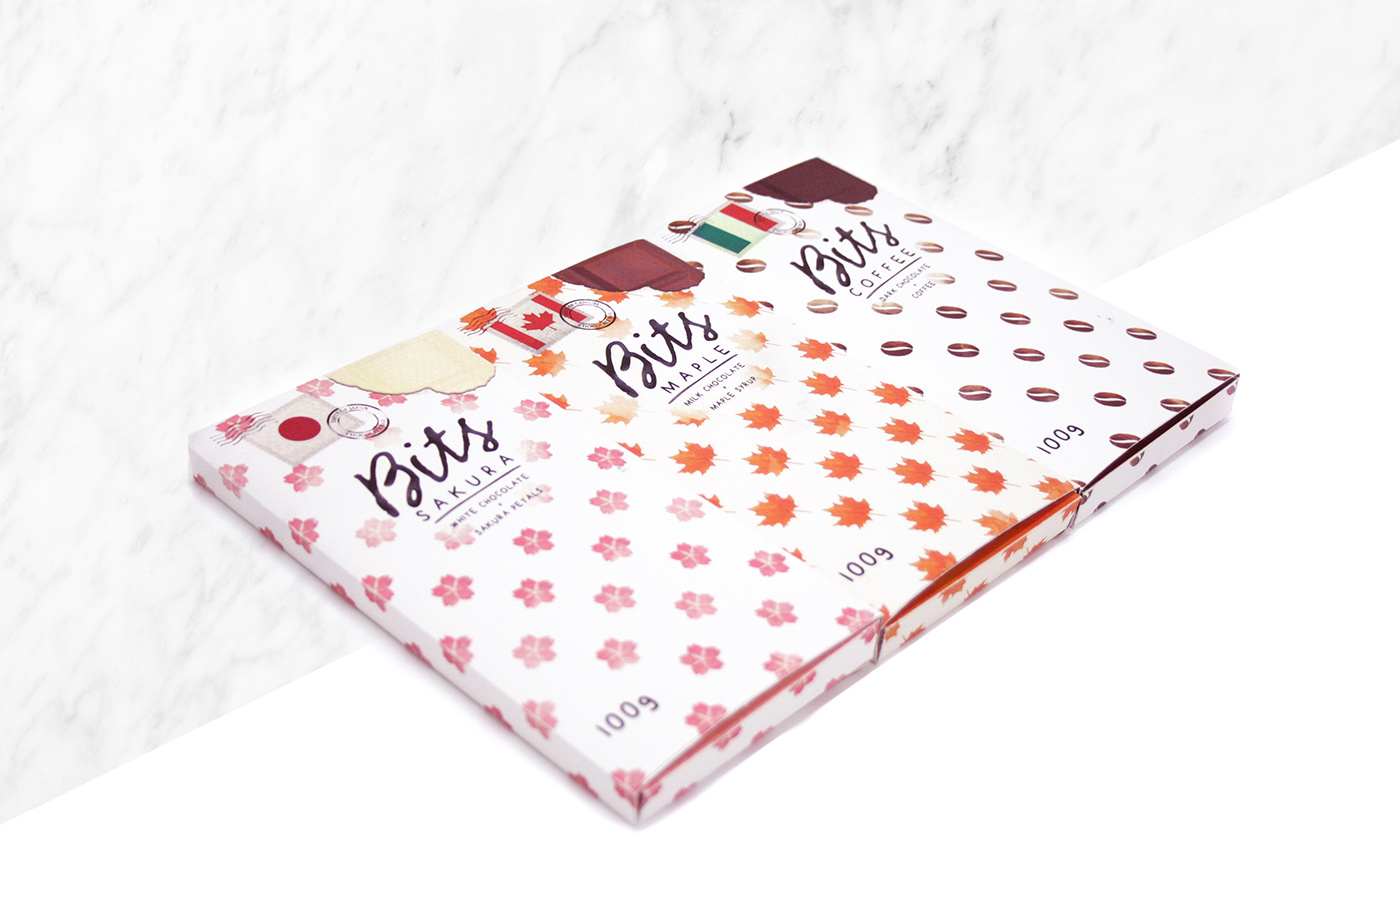 chocolate Packaging bars culture world japan Canada Italy Coffee adobeawards